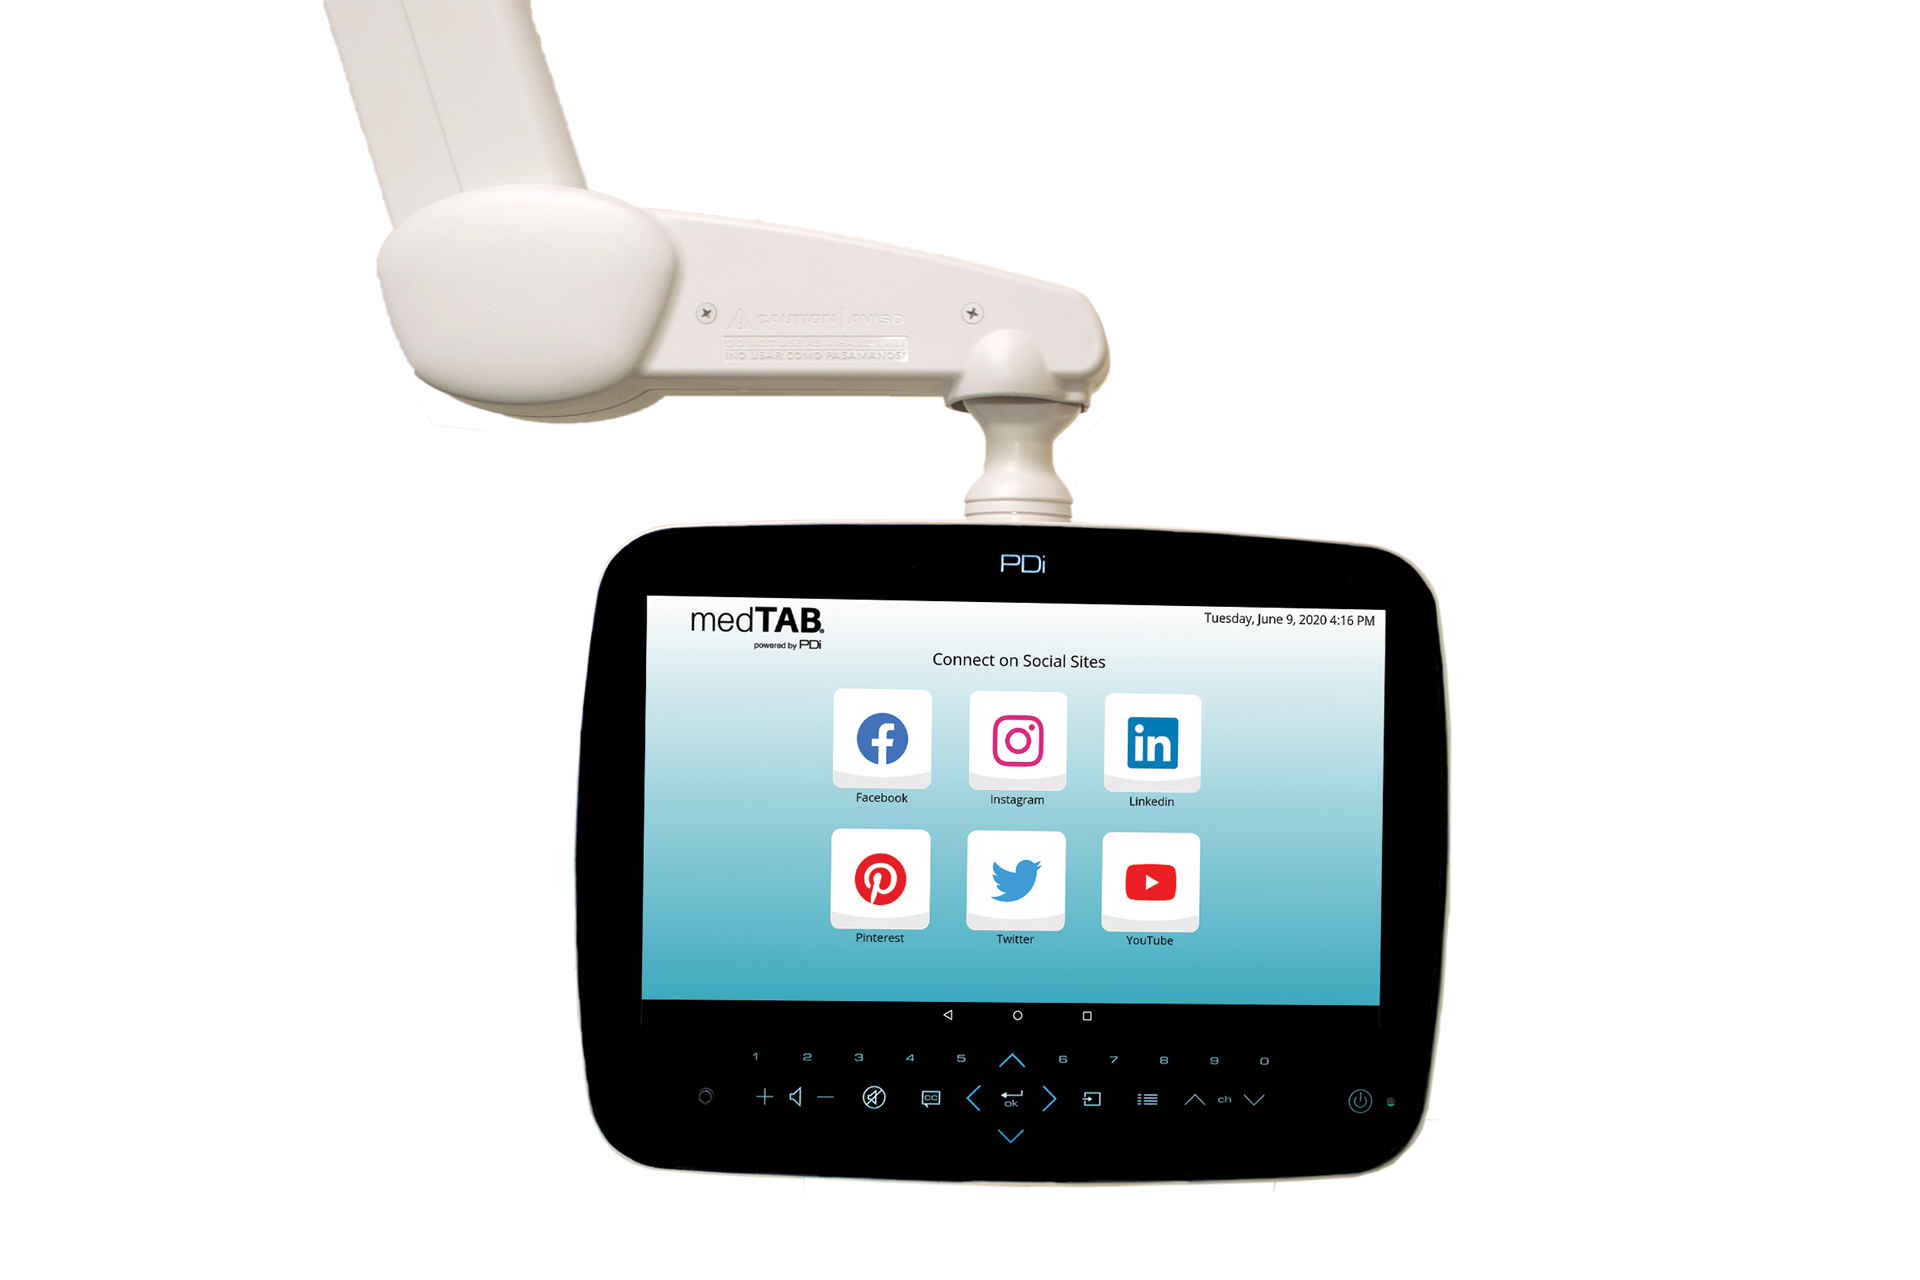 Product image of the medTAB14 healthcare television built by PDi Communication Systems, Inc. on the social media screen